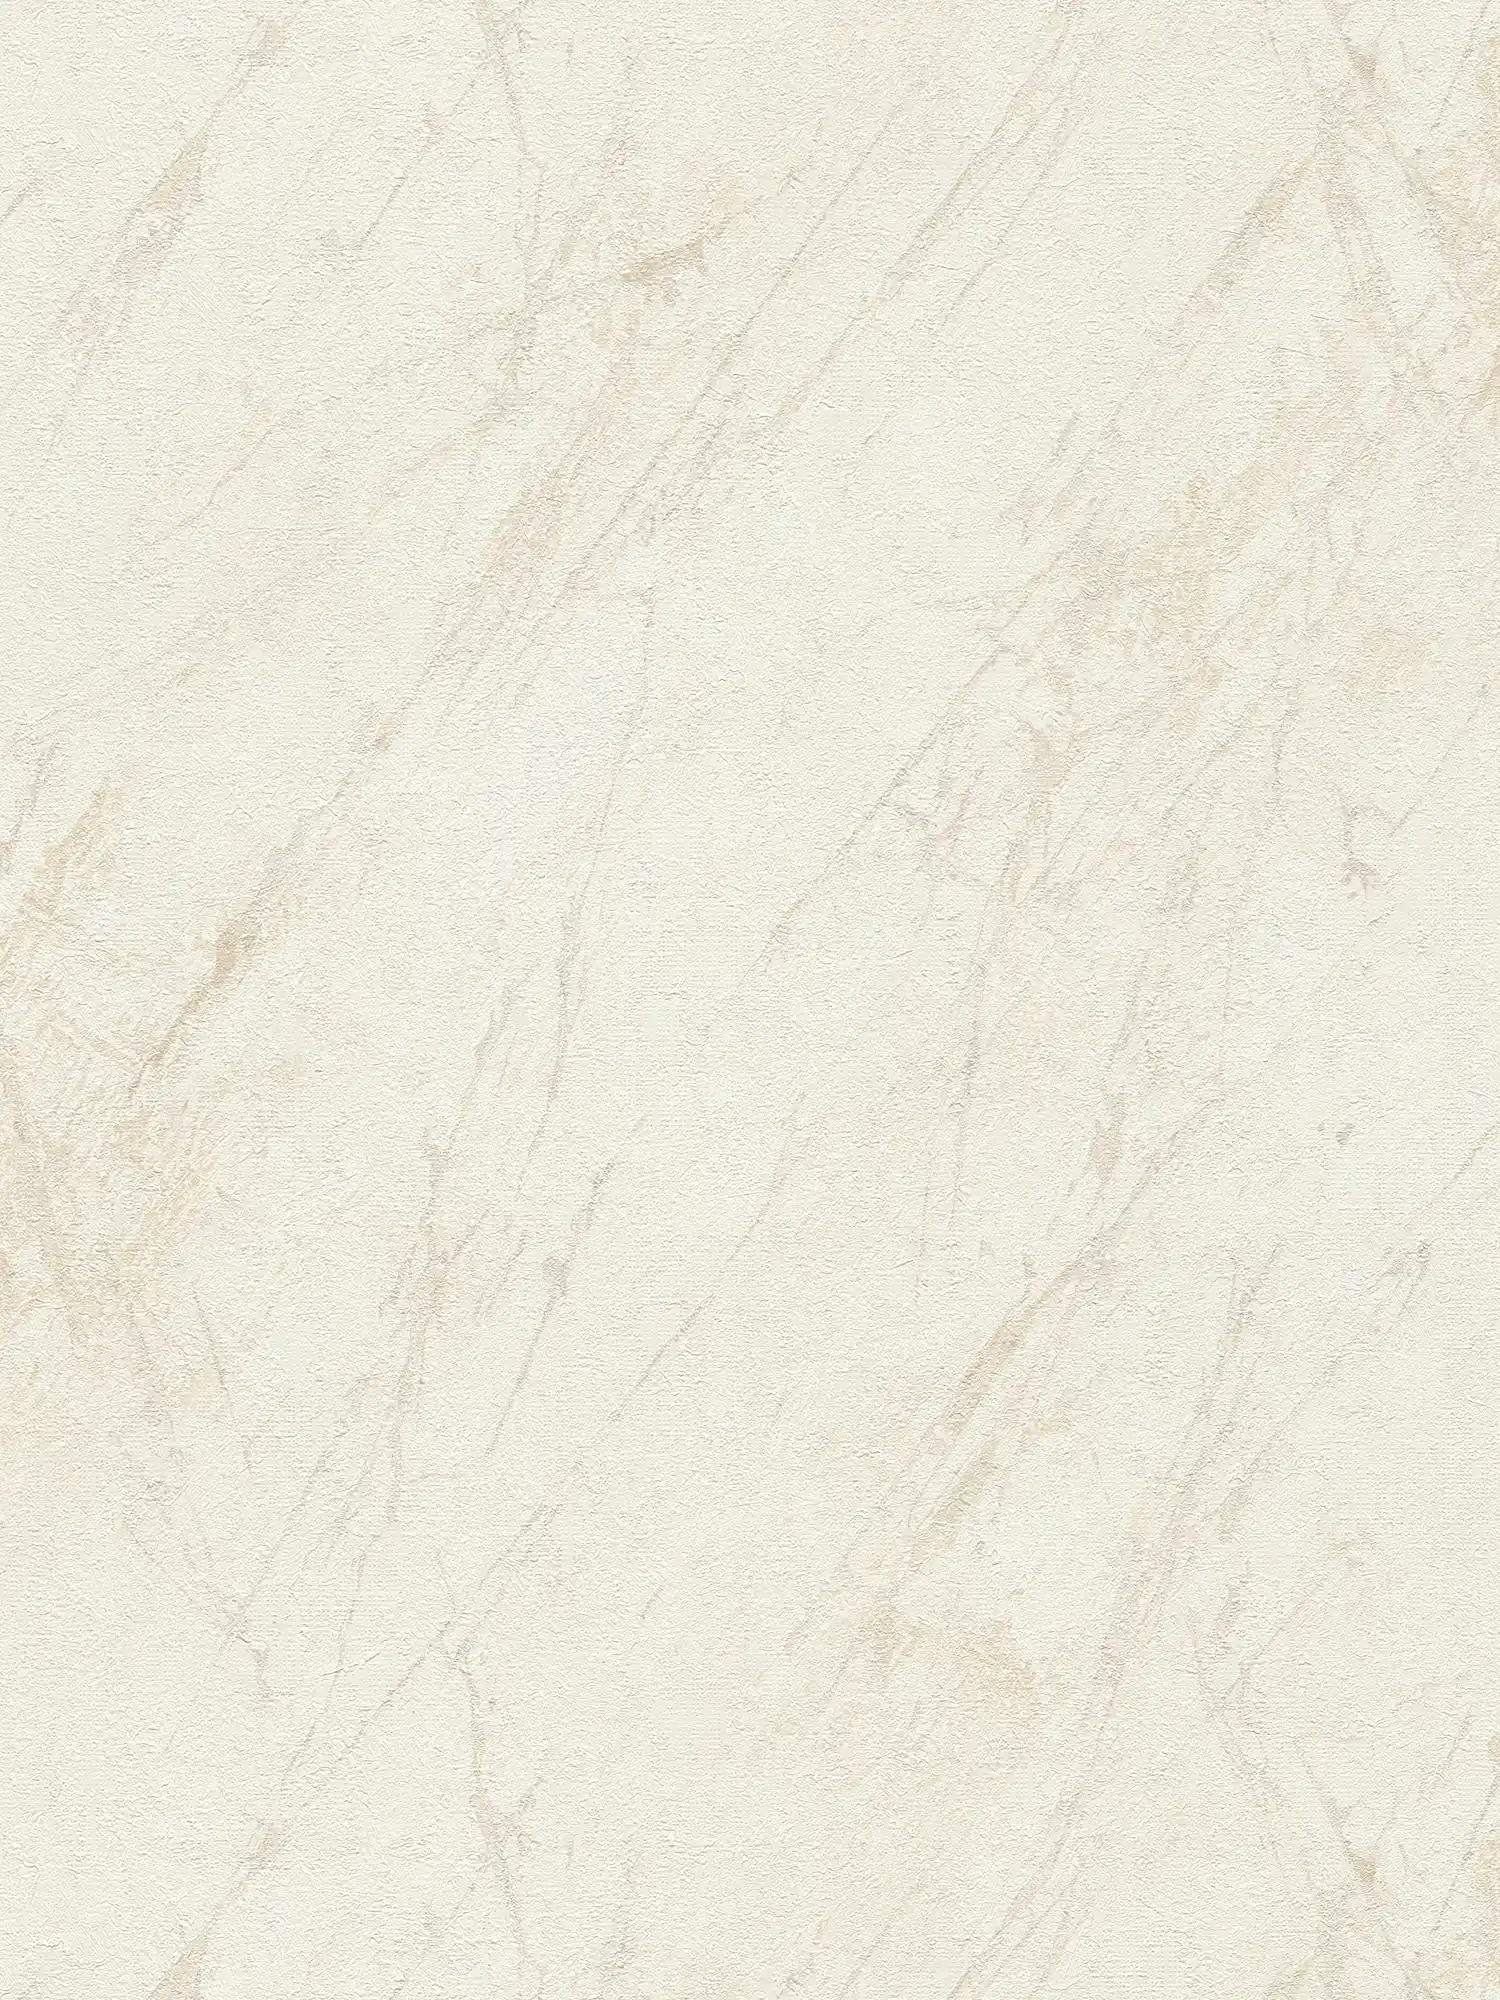 Marble look wallpaper in cream with structure design
